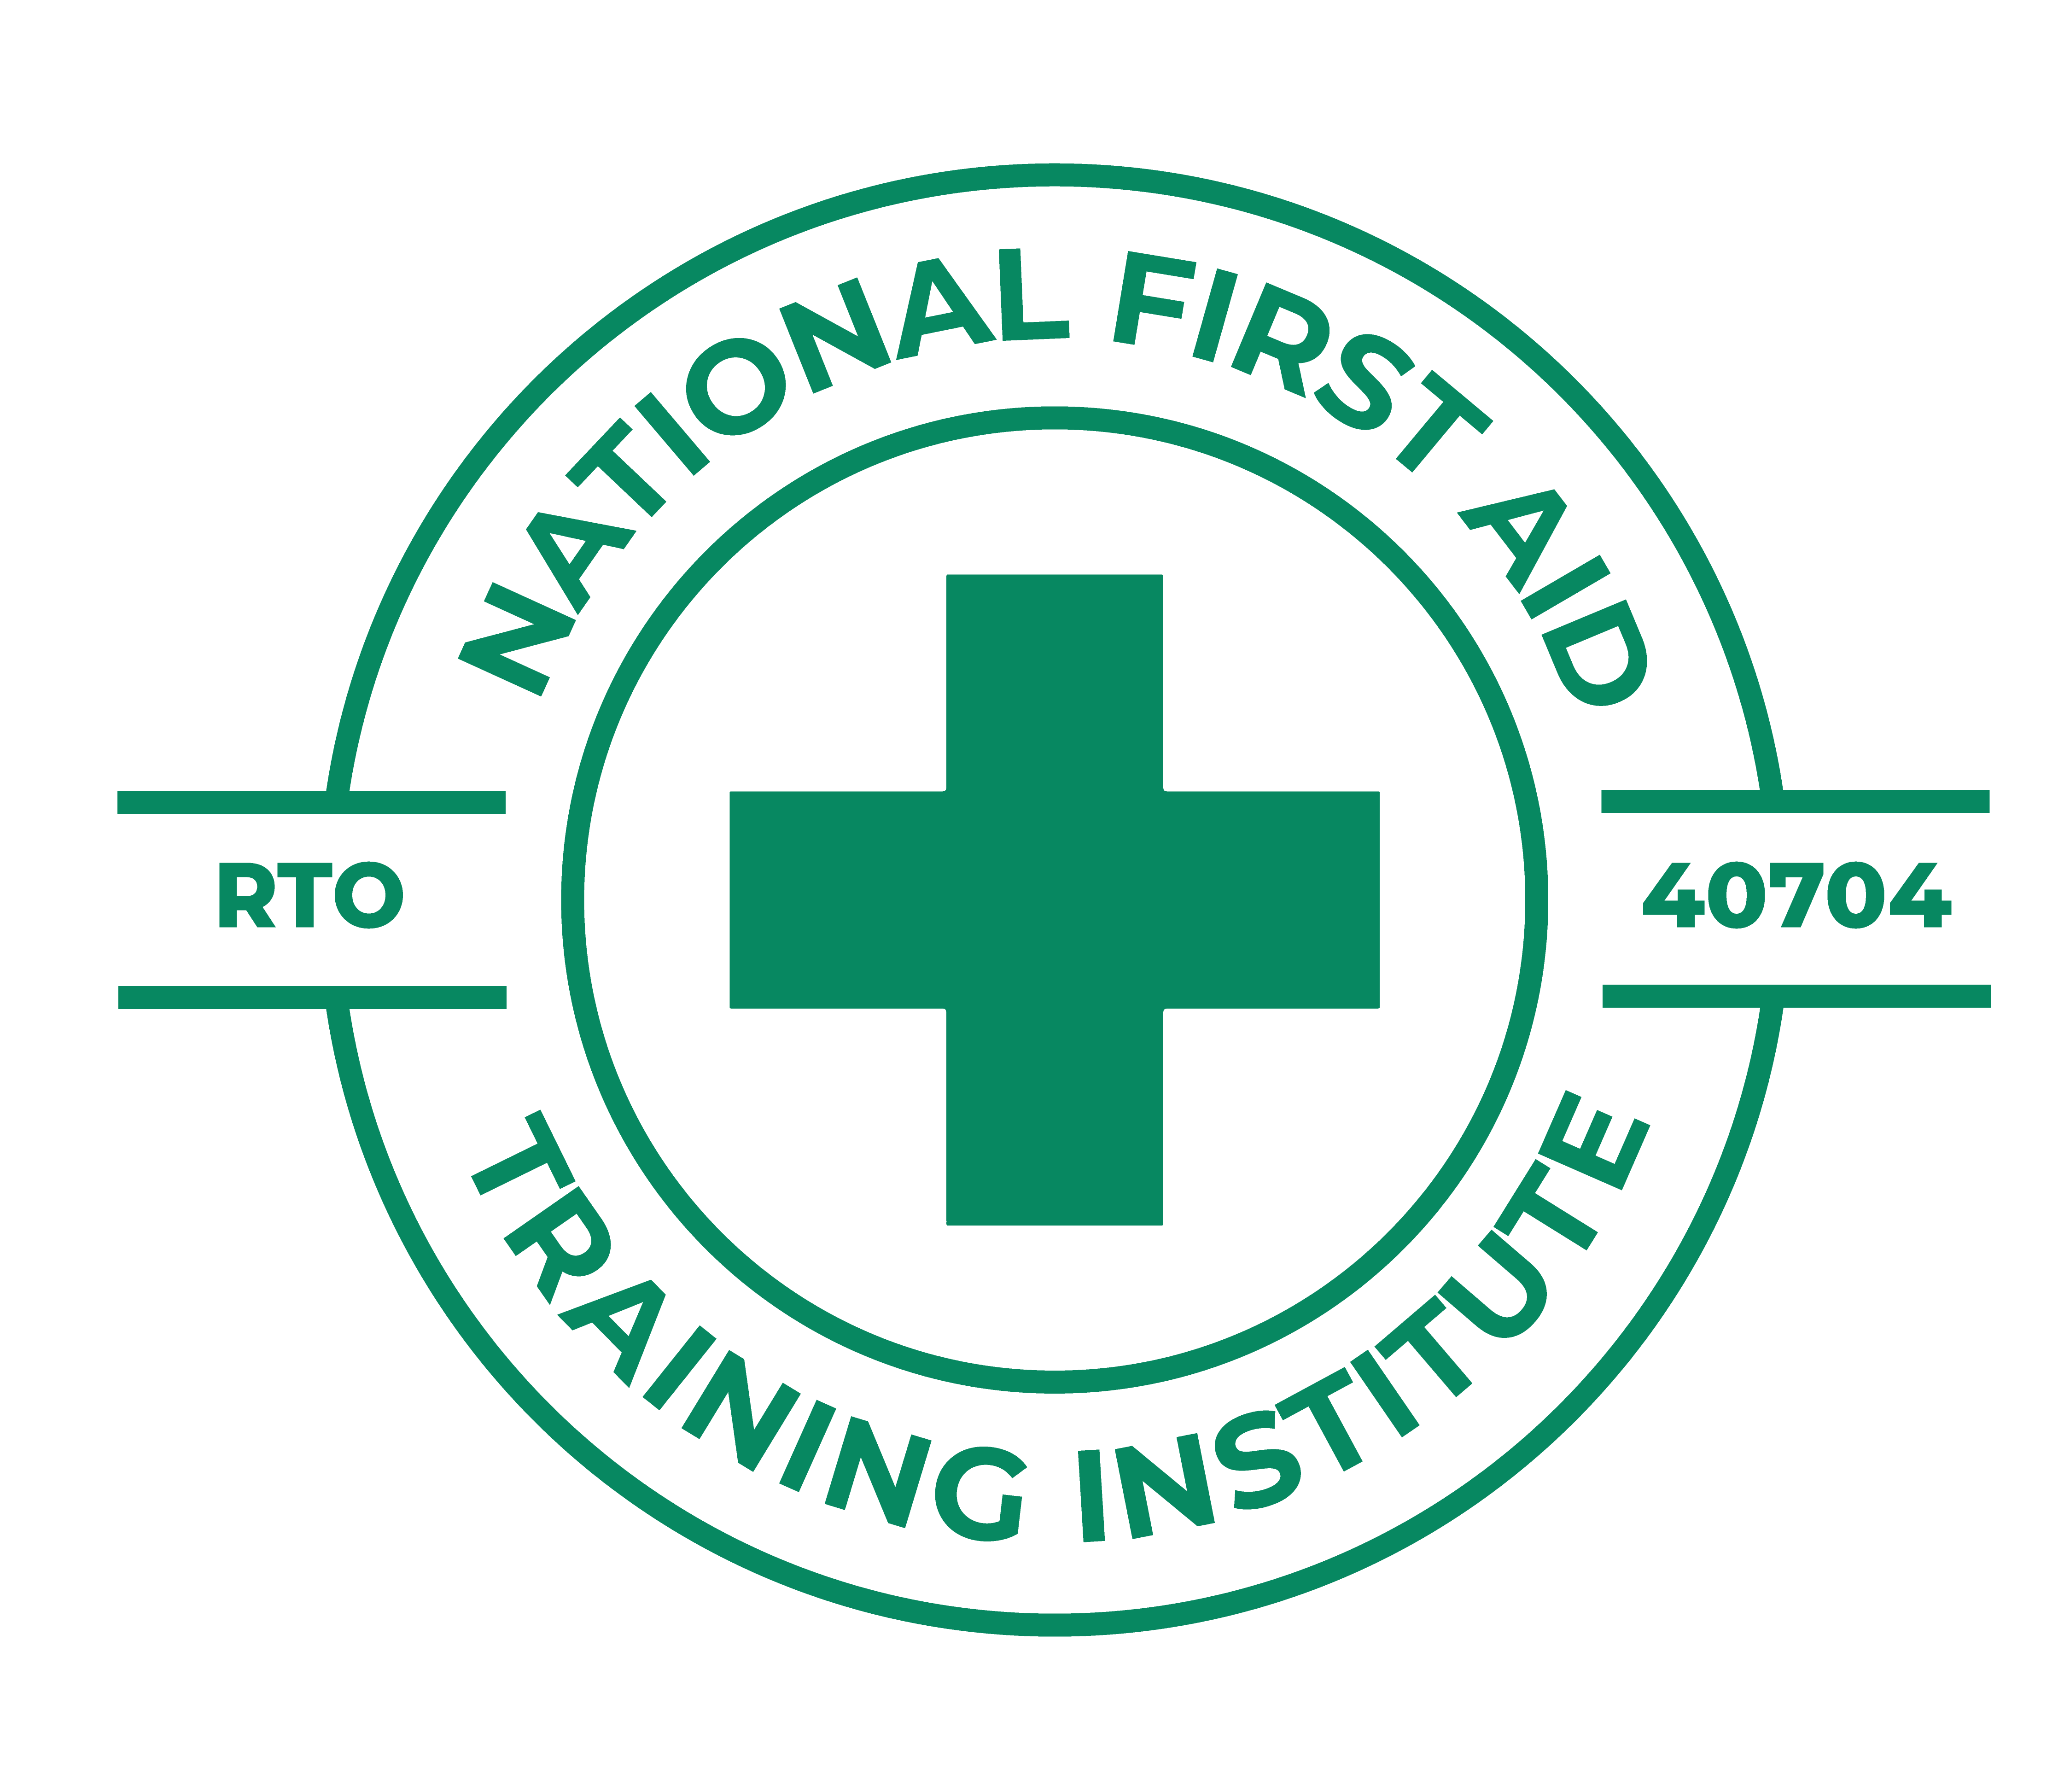 National First Aid Training Institute